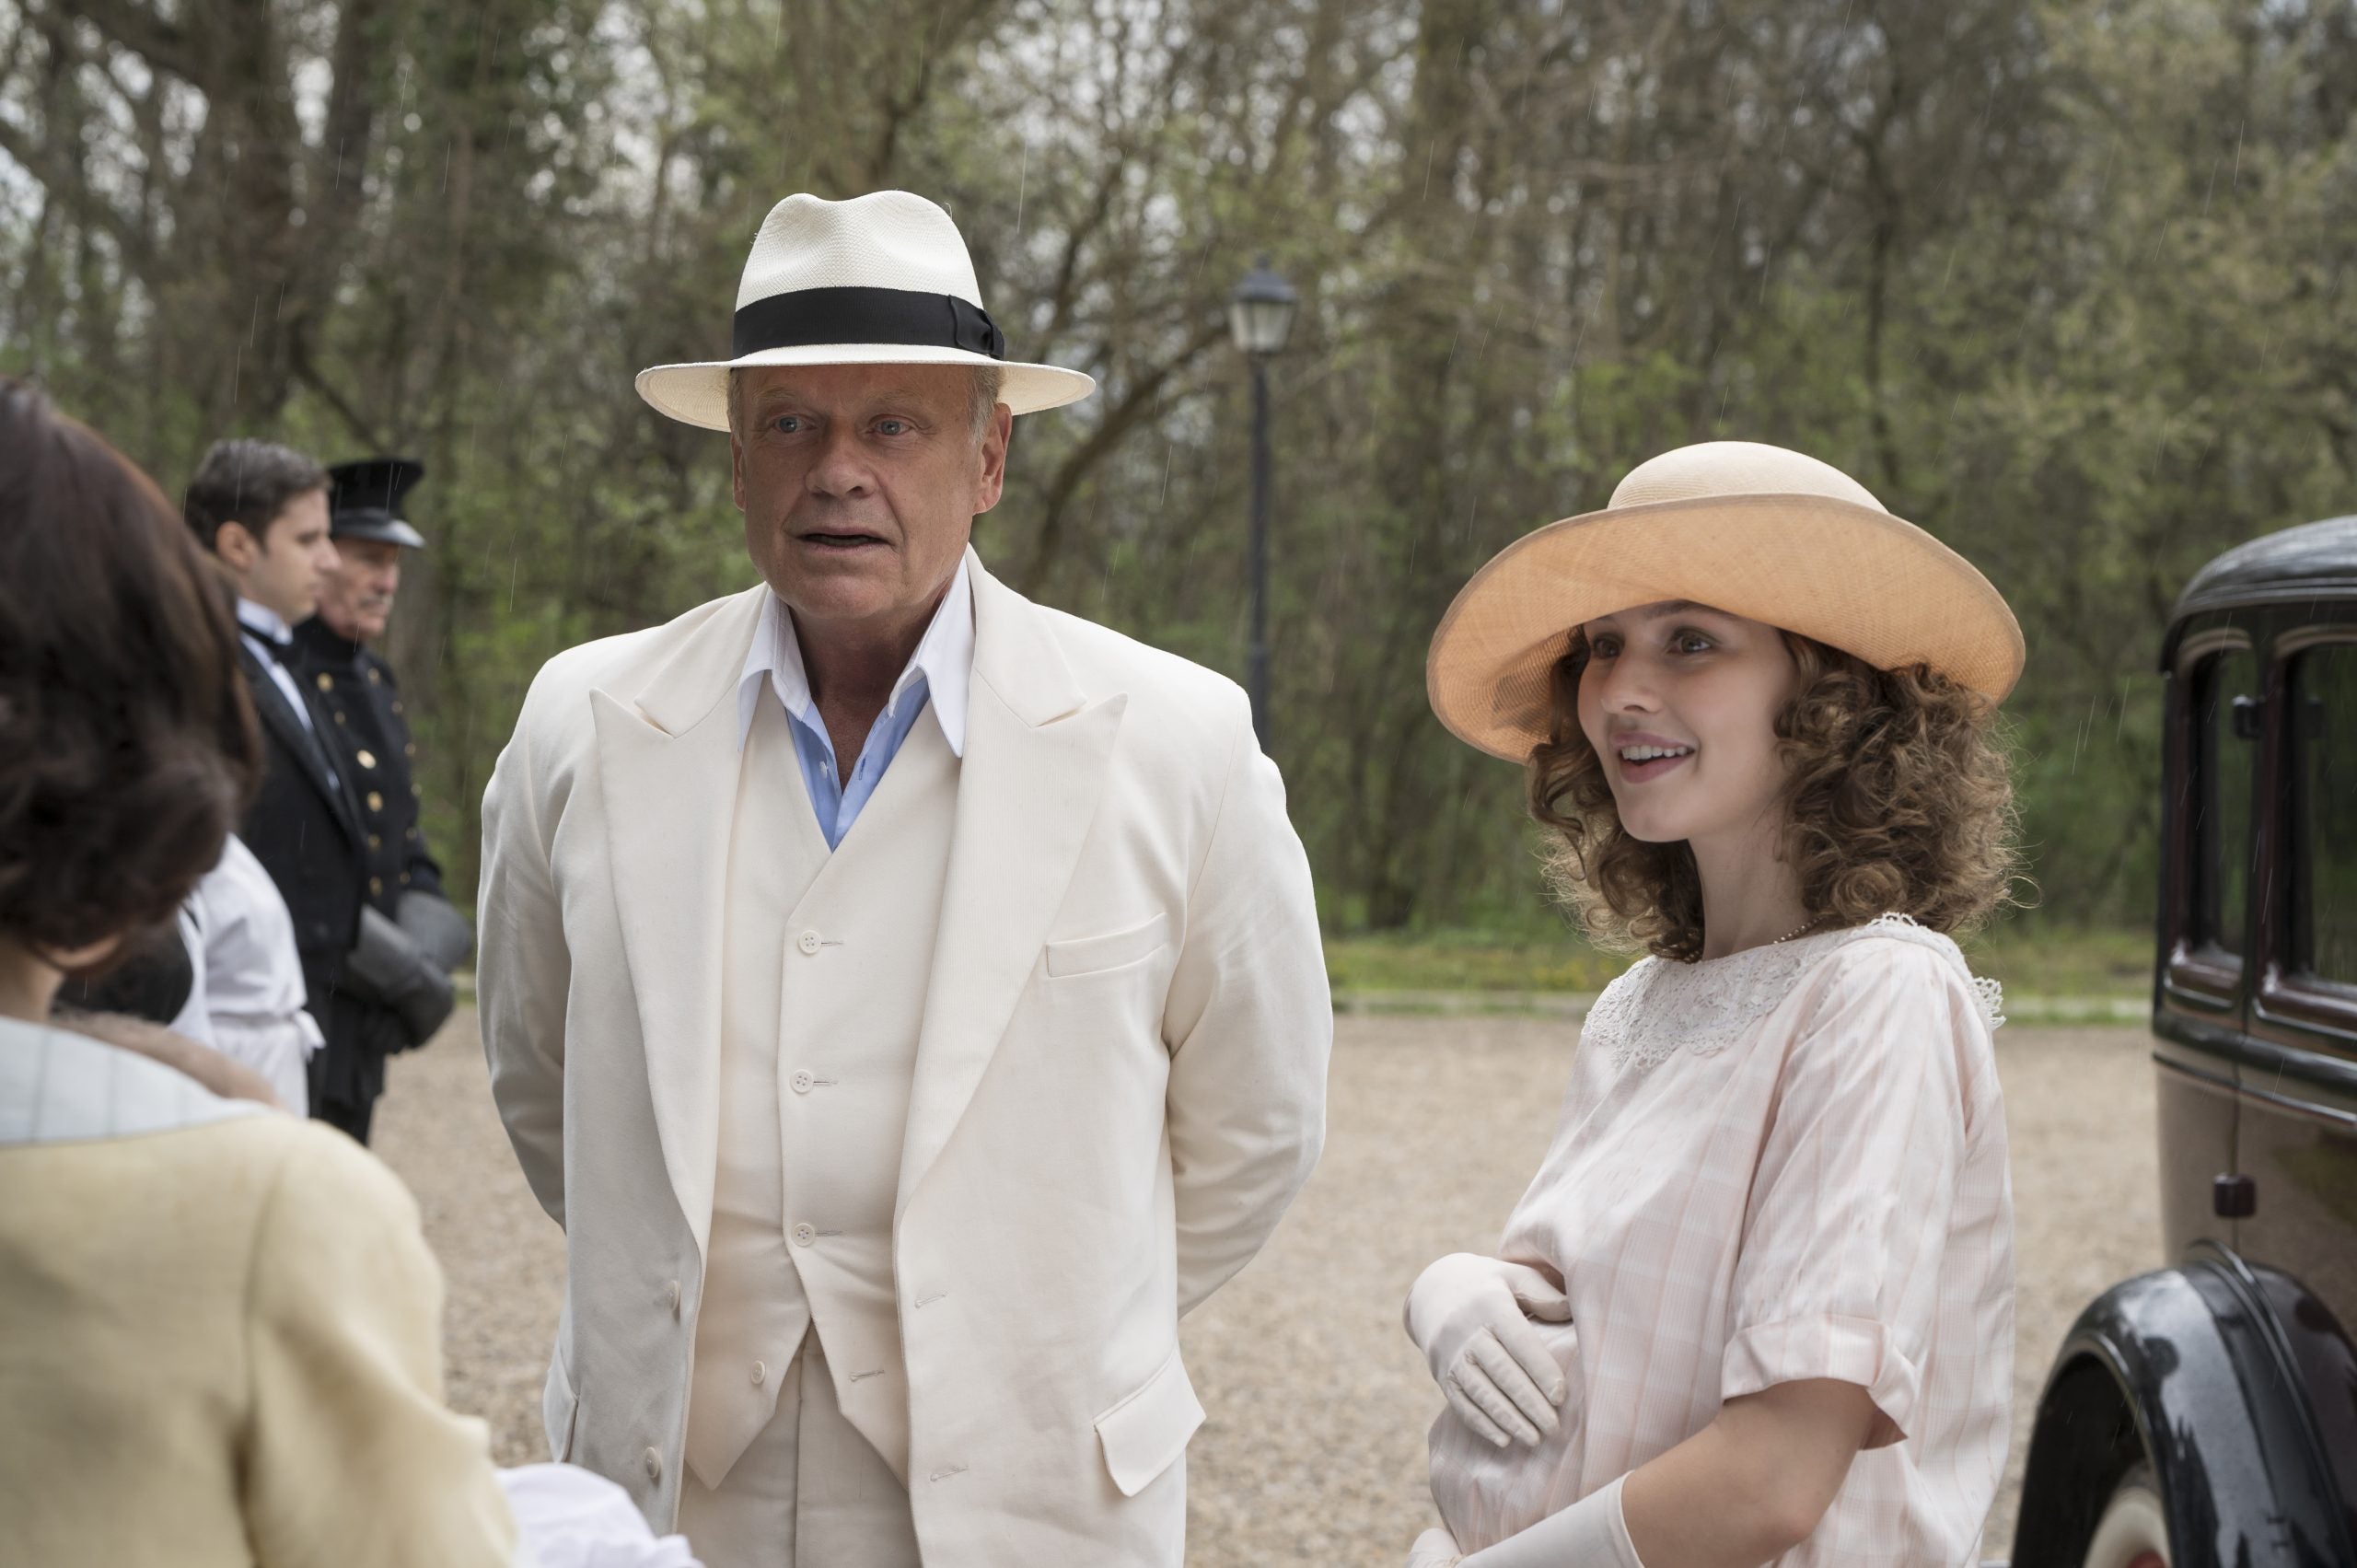 Kelsey Grammer in a white suit and Alana Boden in a hat in 'Flowers in the Attic: The Origin'